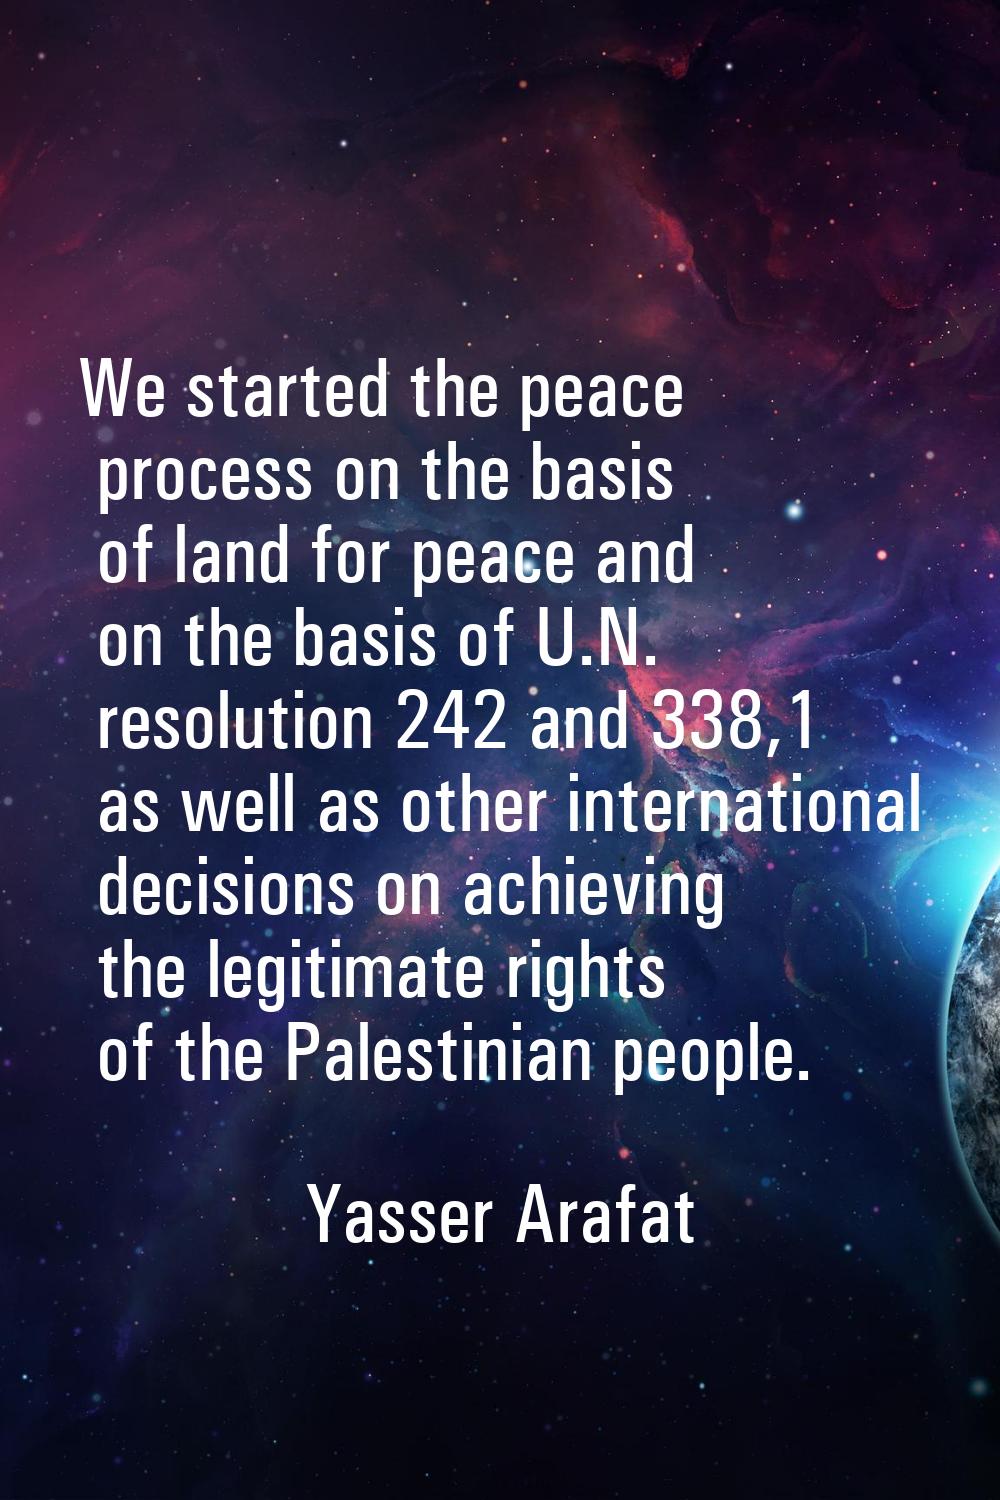 We started the peace process on the basis of land for peace and on the basis of U.N. resolution 242